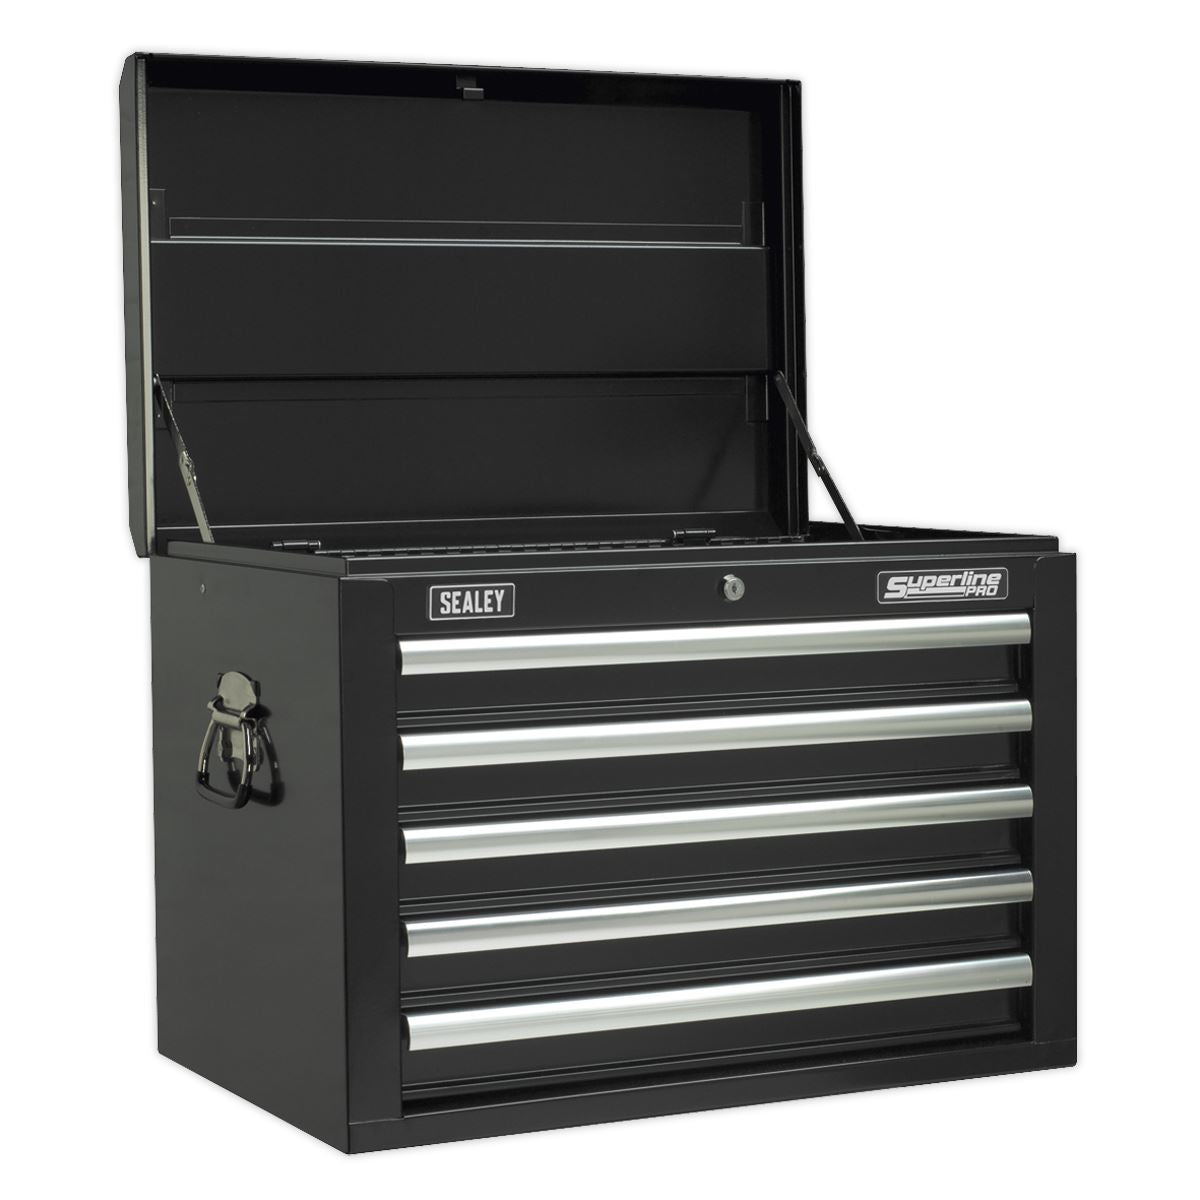 Sealey Superline Pro Topchest 5 Drawer with Ball-Bearing Slides - Black